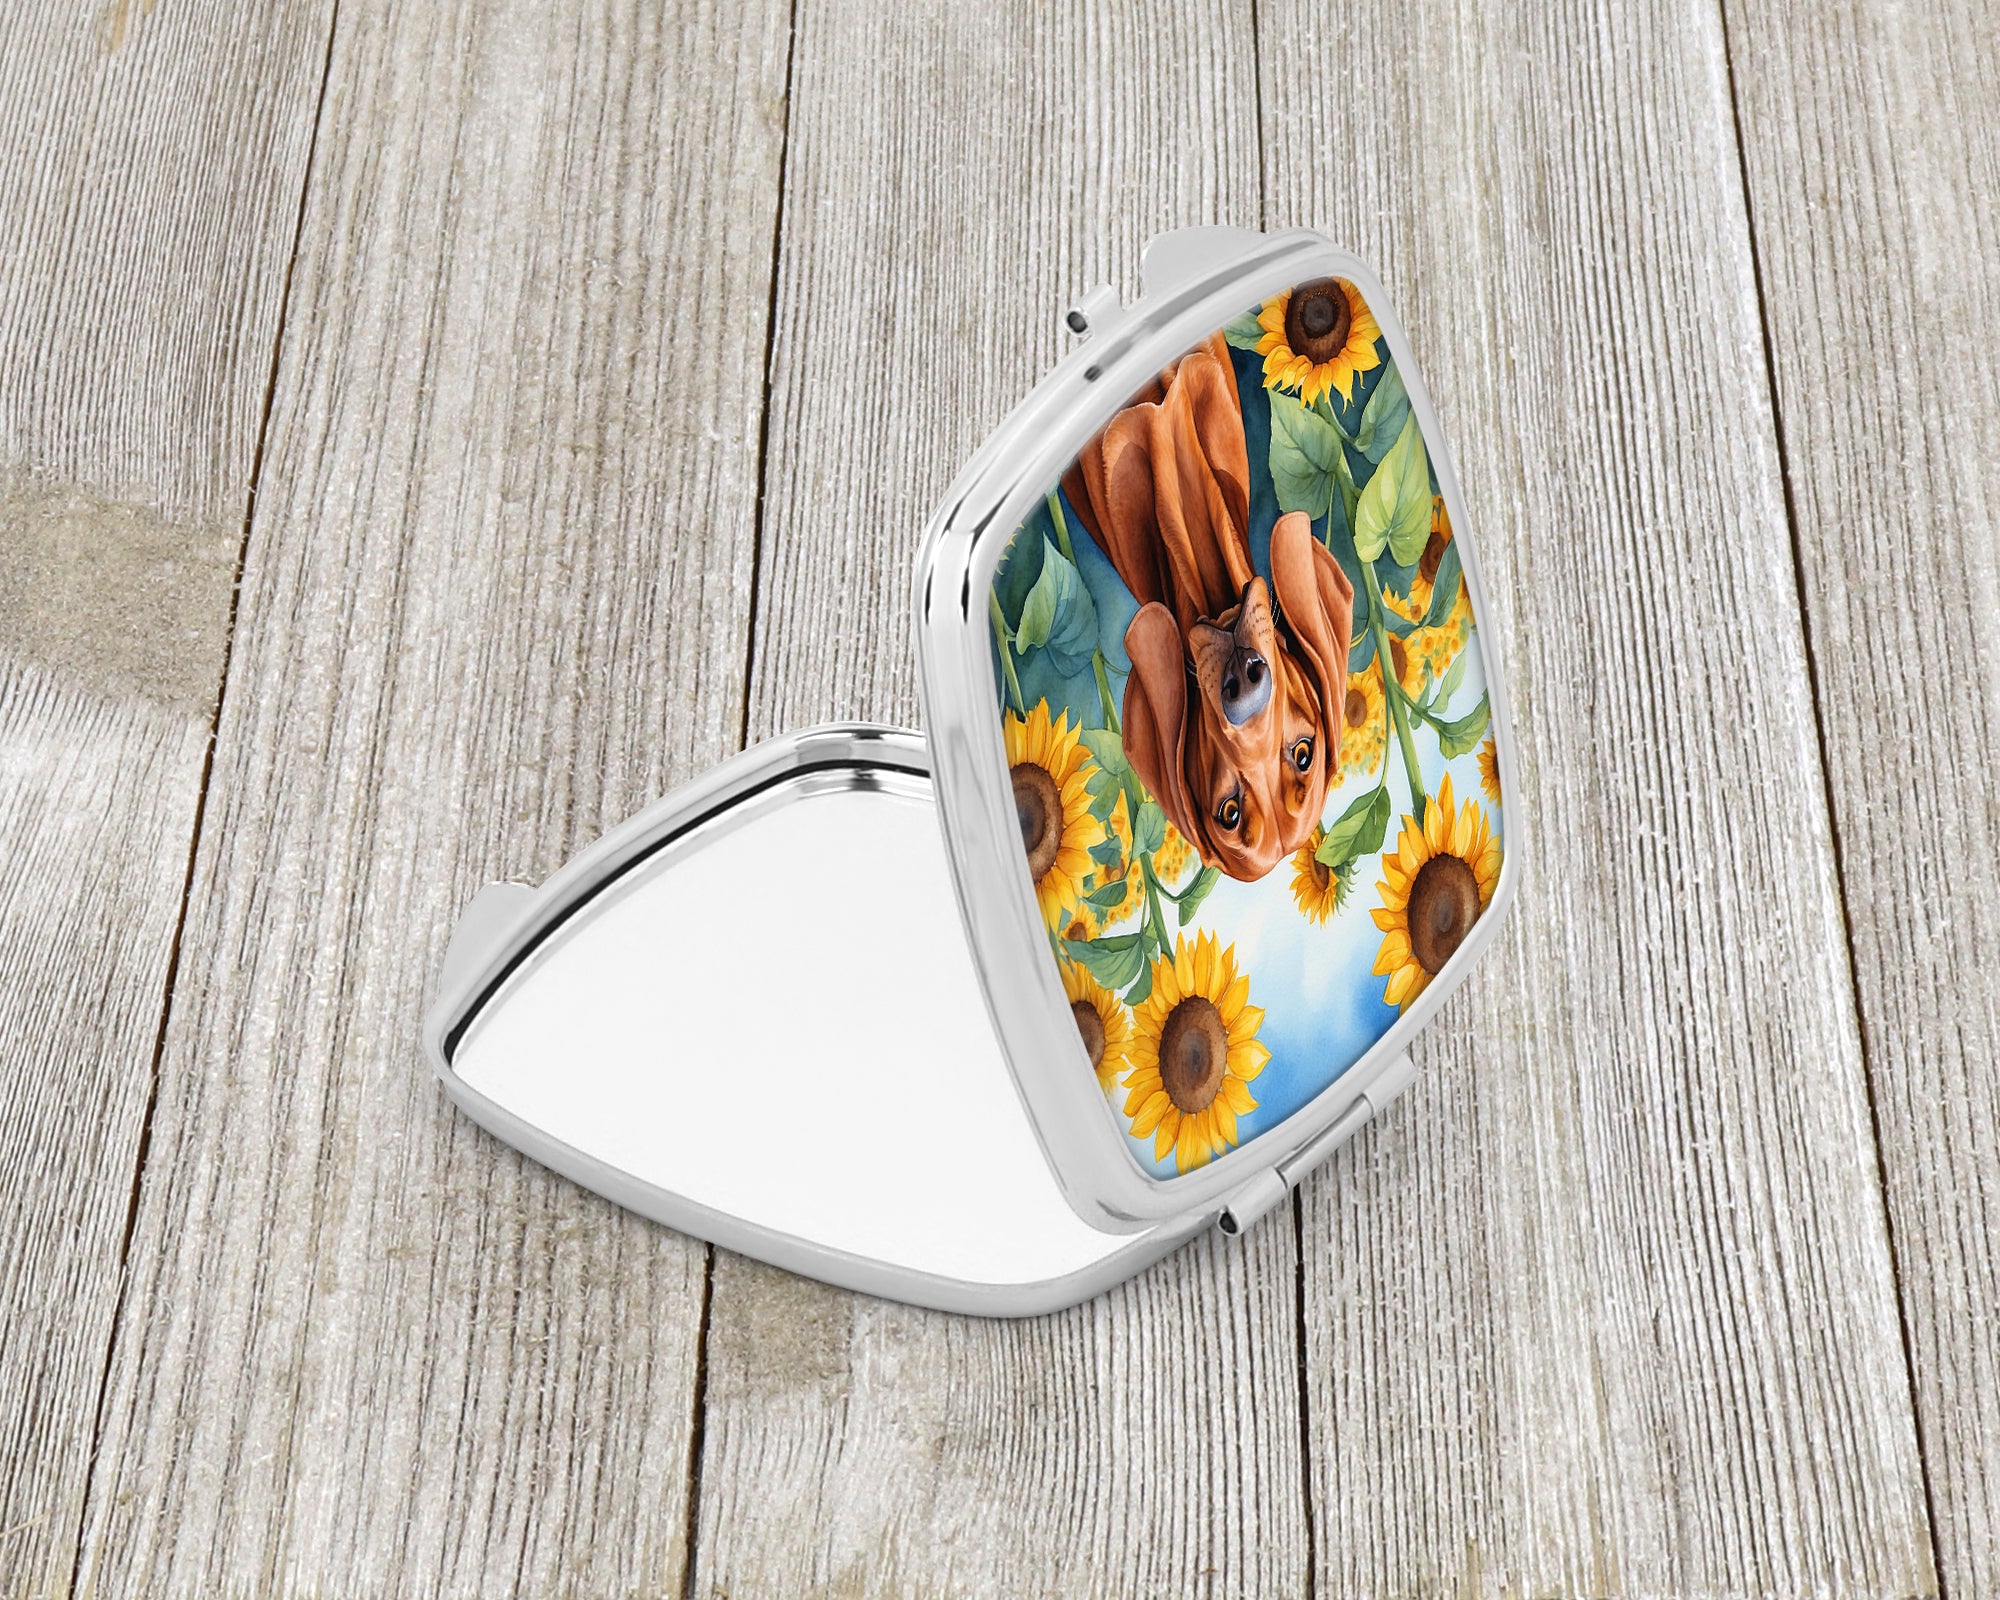 Buy this Redbone Coonhound in Sunflowers Compact Mirror